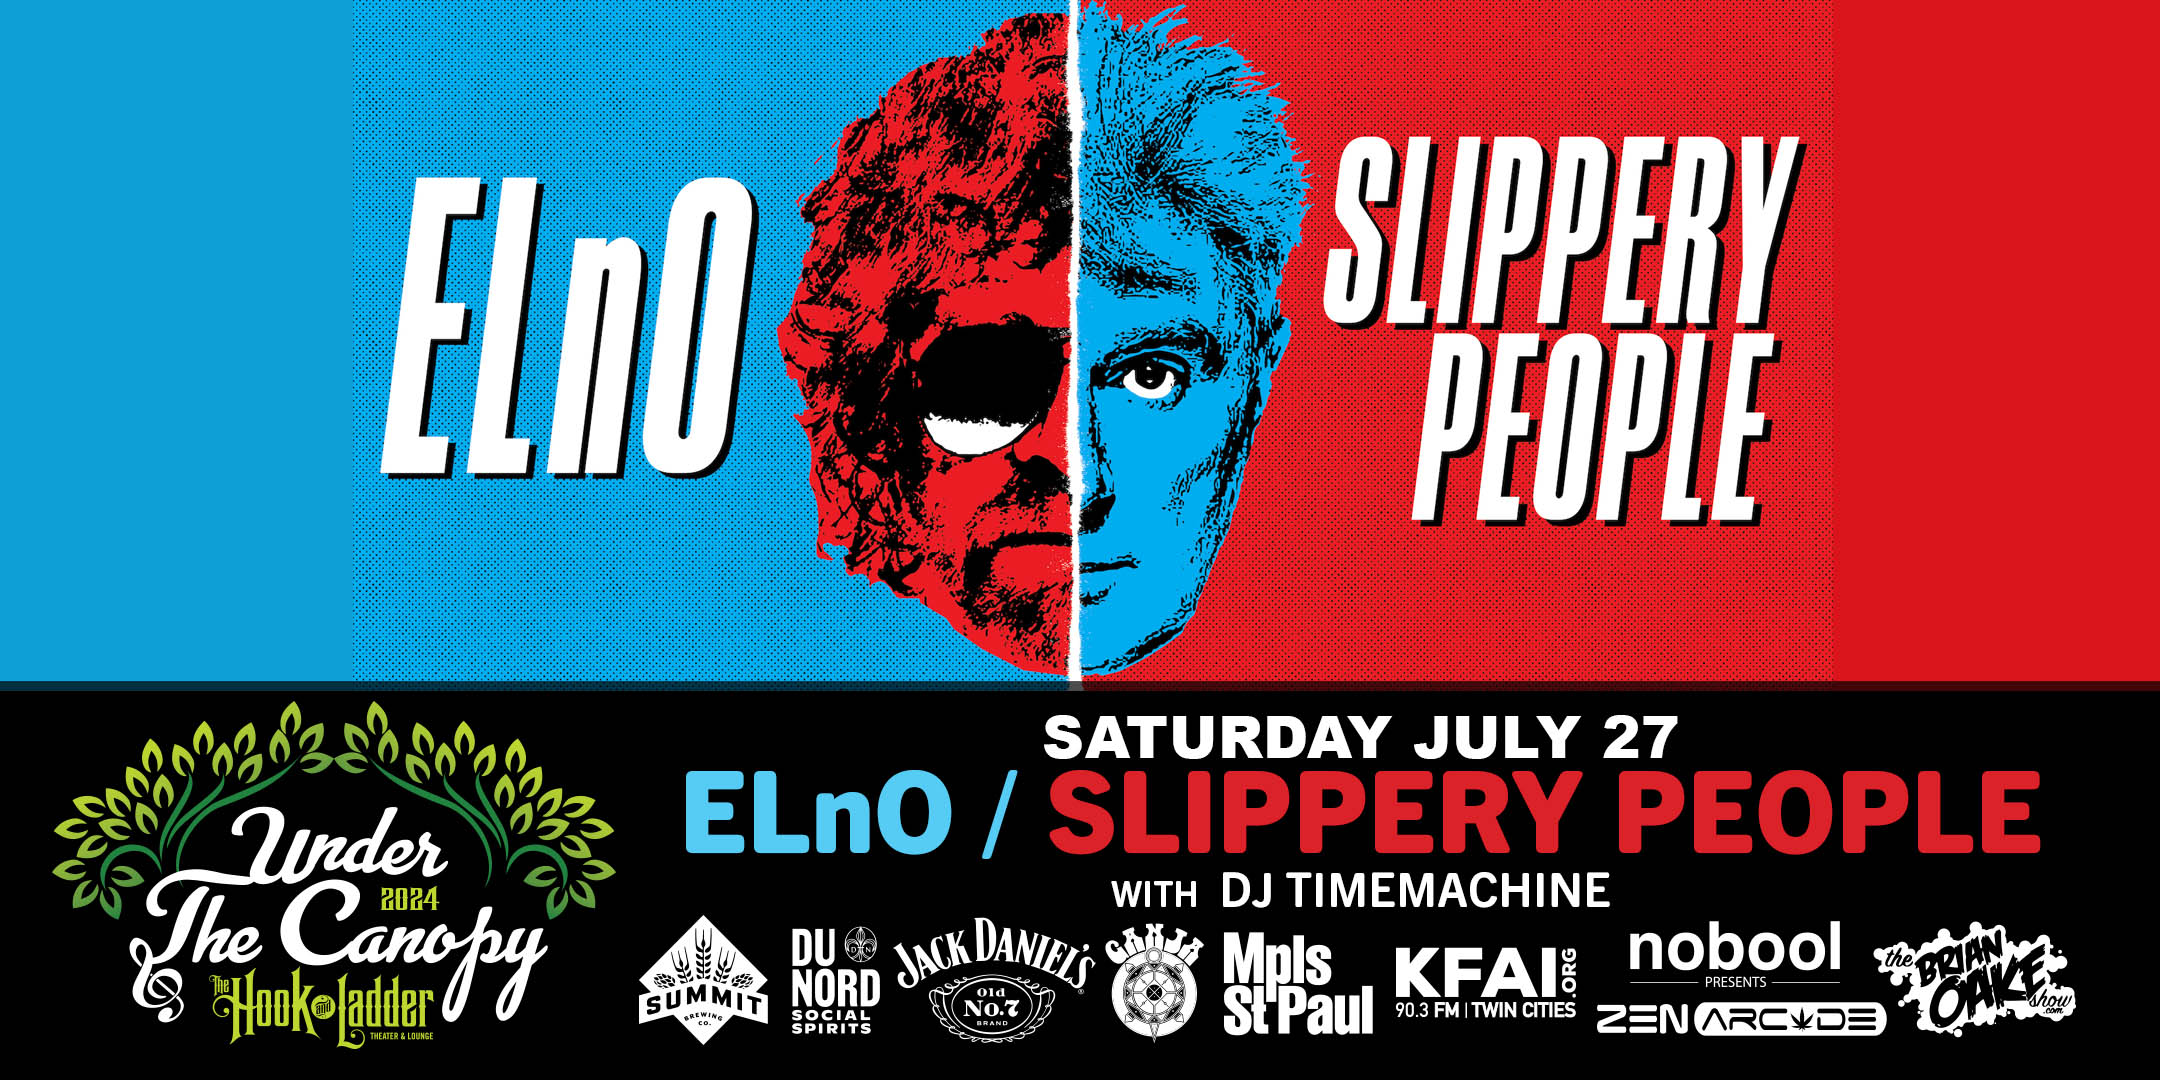 ELnO | Slippery People with DJ TimeMachine Saturday, July 27 Under The Canopy at The Hook and Ladder Theater "An Urban Outdoor Summer Concert Series" Doors 6:00pm :: Music 7:00pm :: 21+ Reserved Seats: $40 GA: $25 ADV / $30 DOS *Does not include Fees